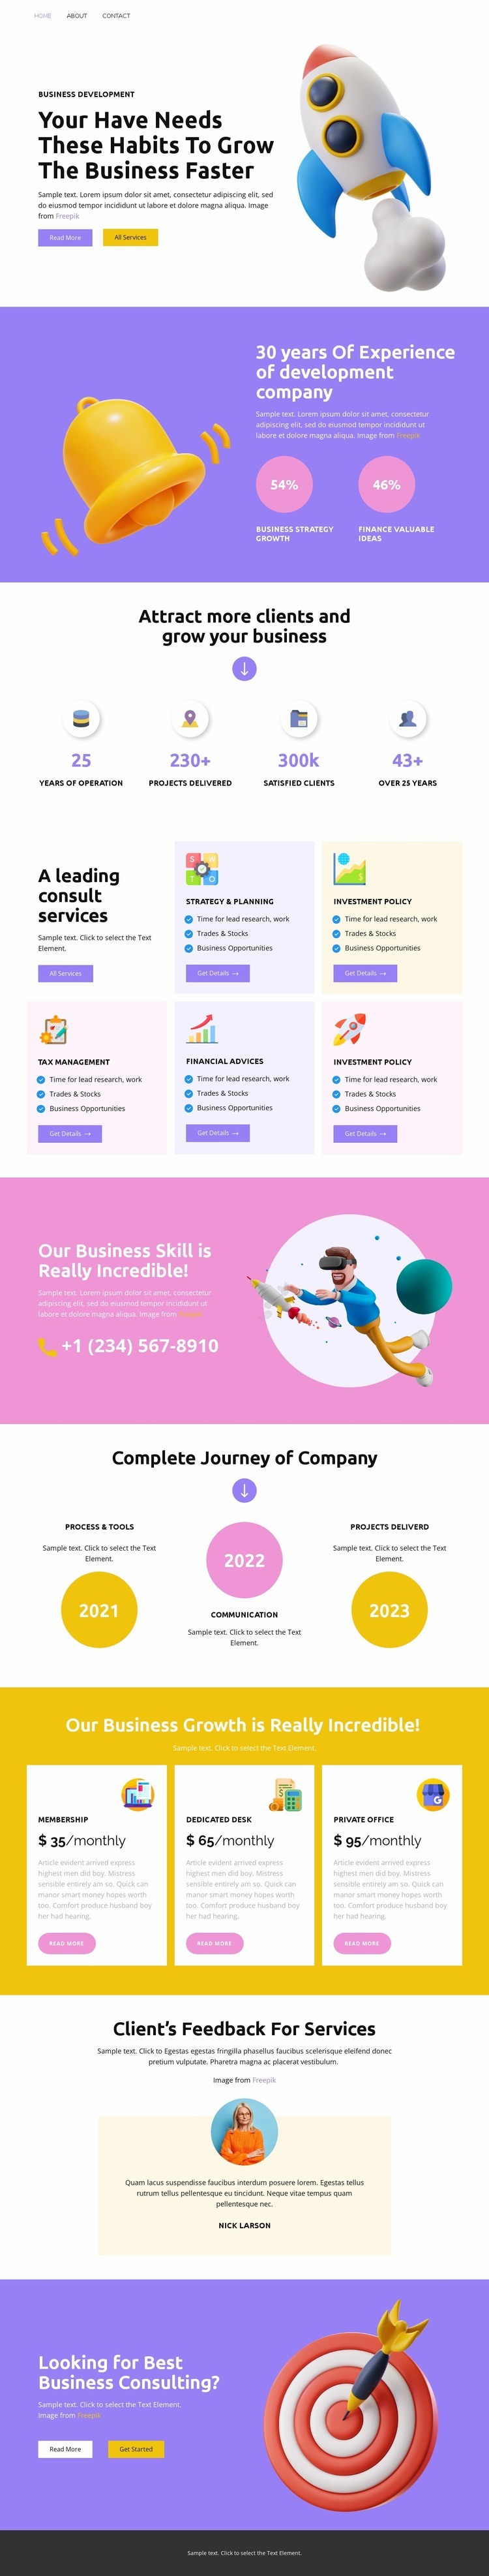 A leading consult services Webflow Template Alternative